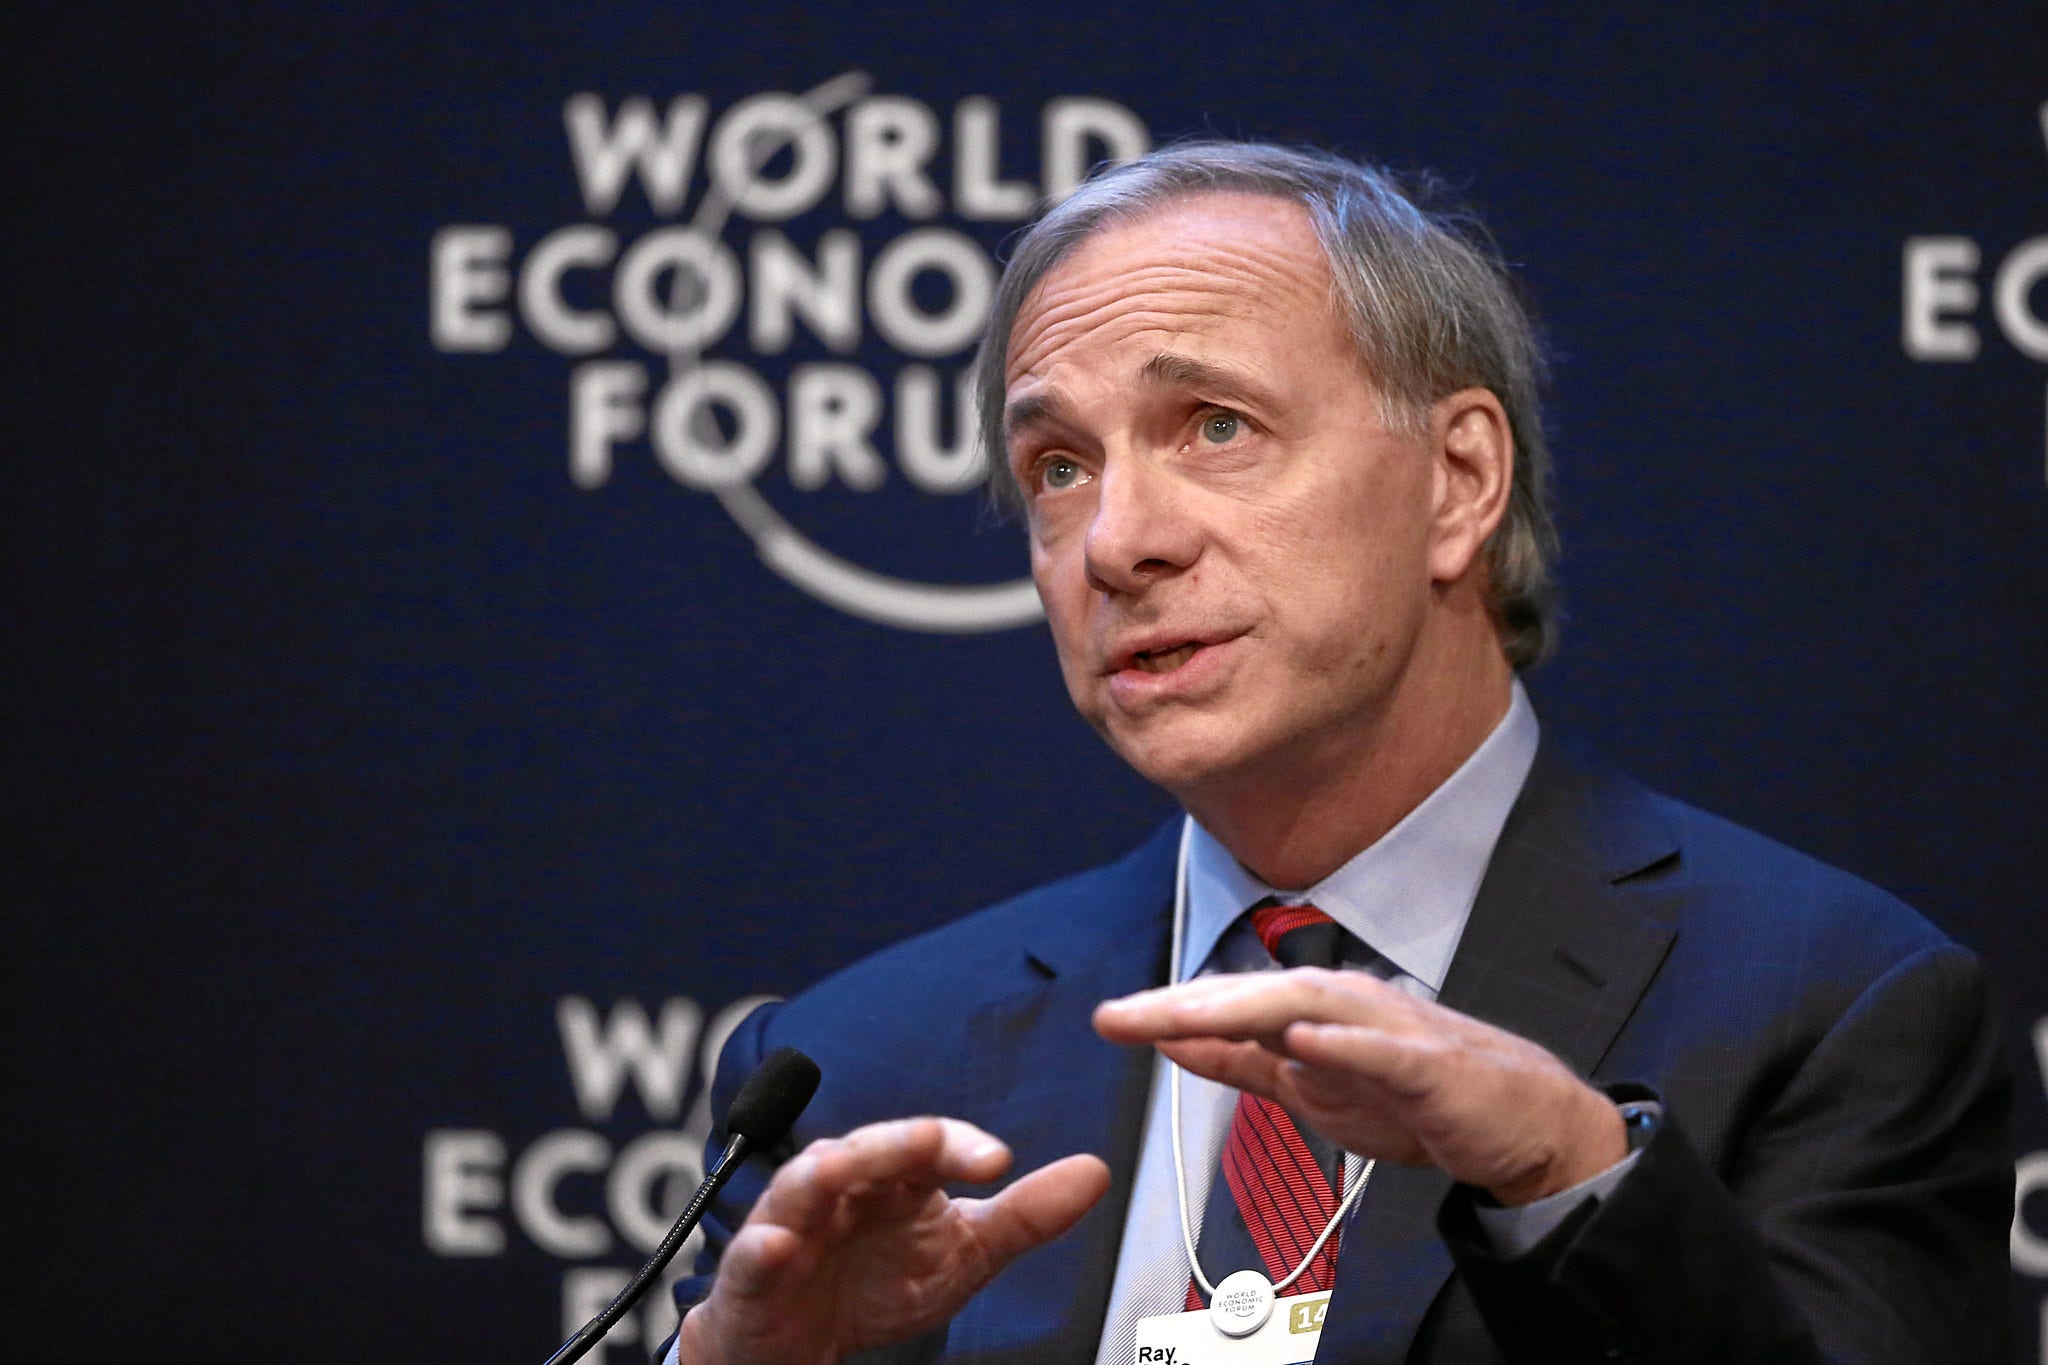 Founder Of World's Largest Hedge Fund Rails Against Fed, Predicts 20% Stock Plummet